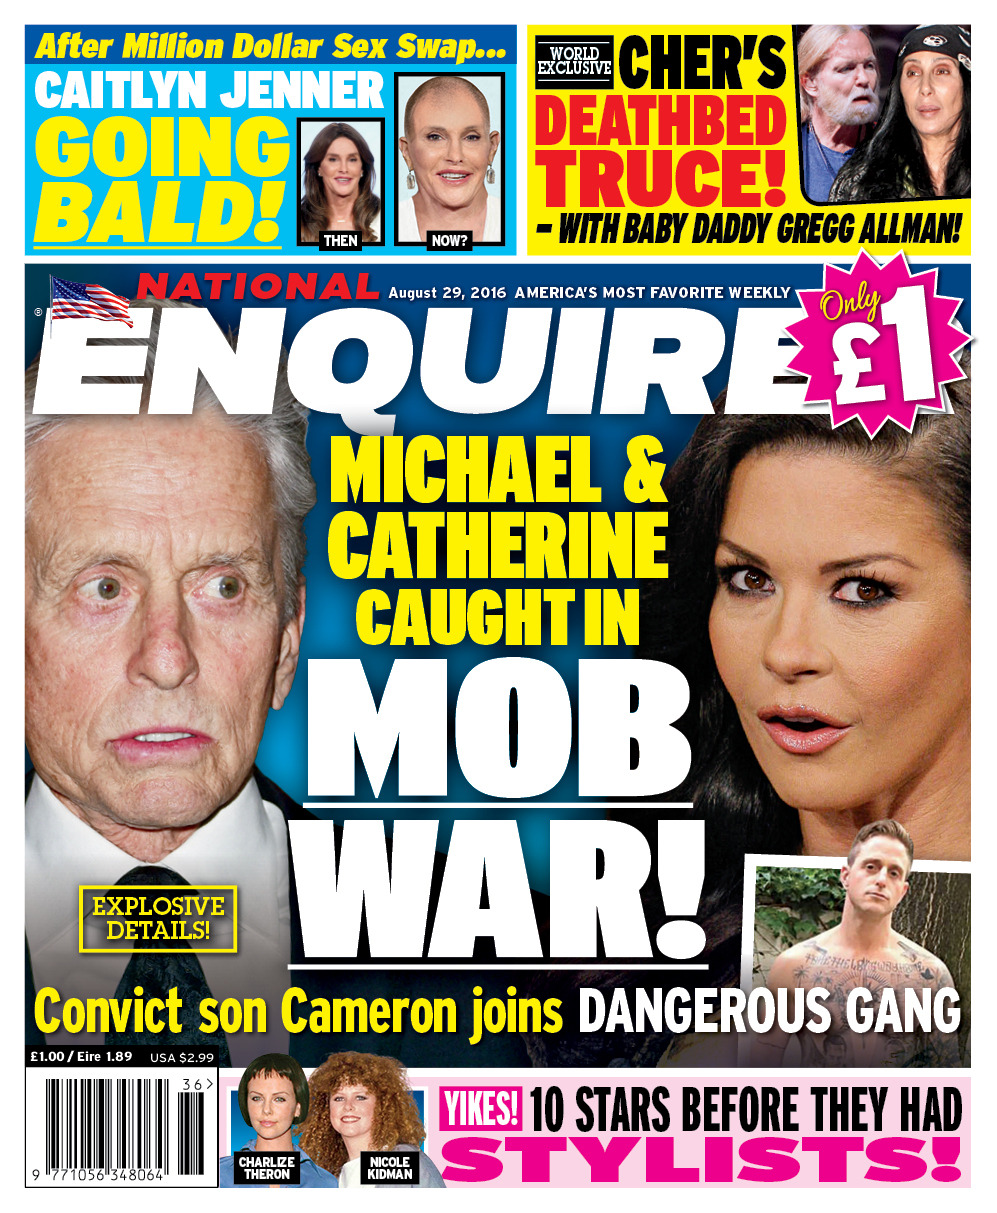 Michael & Catherine Caught In Mob War! Find out all the explosive details of how their convict son Cameron has joined a dangerous gang in the latest issue of the National Enquirer on sale now, go here to find your nearest stockist